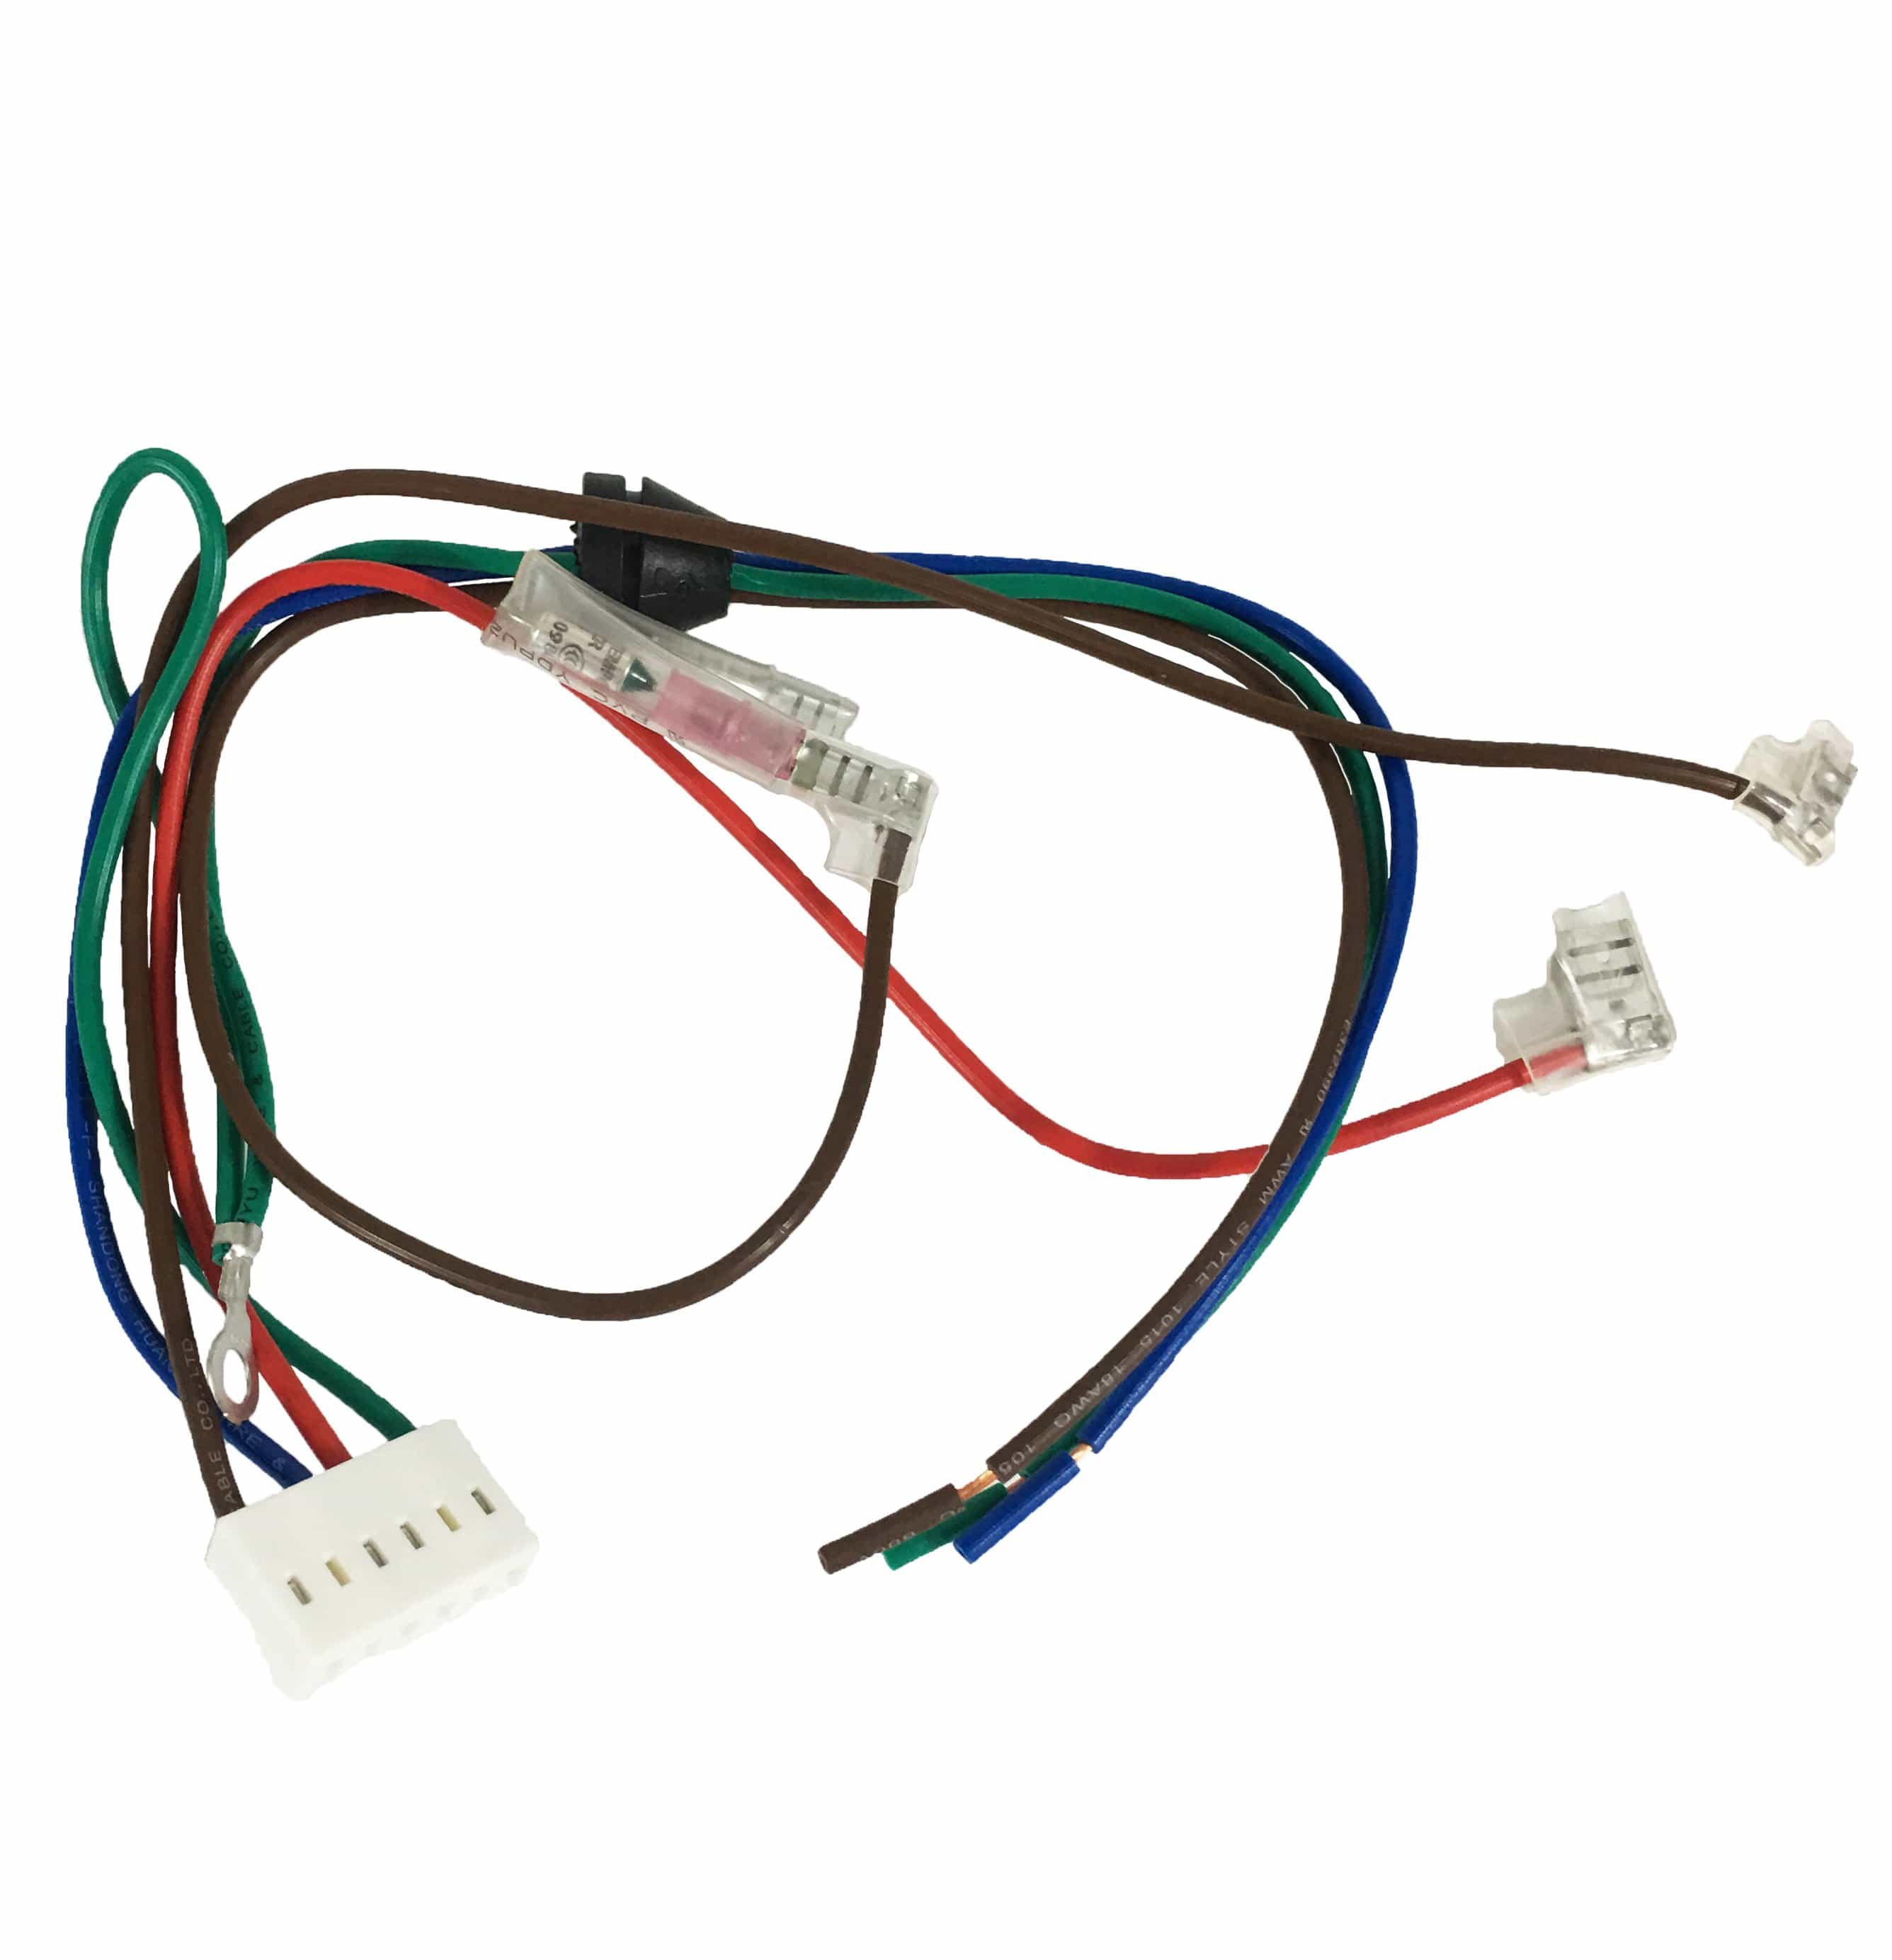 Atwood 92076 Wiring Harness For Water Heaters